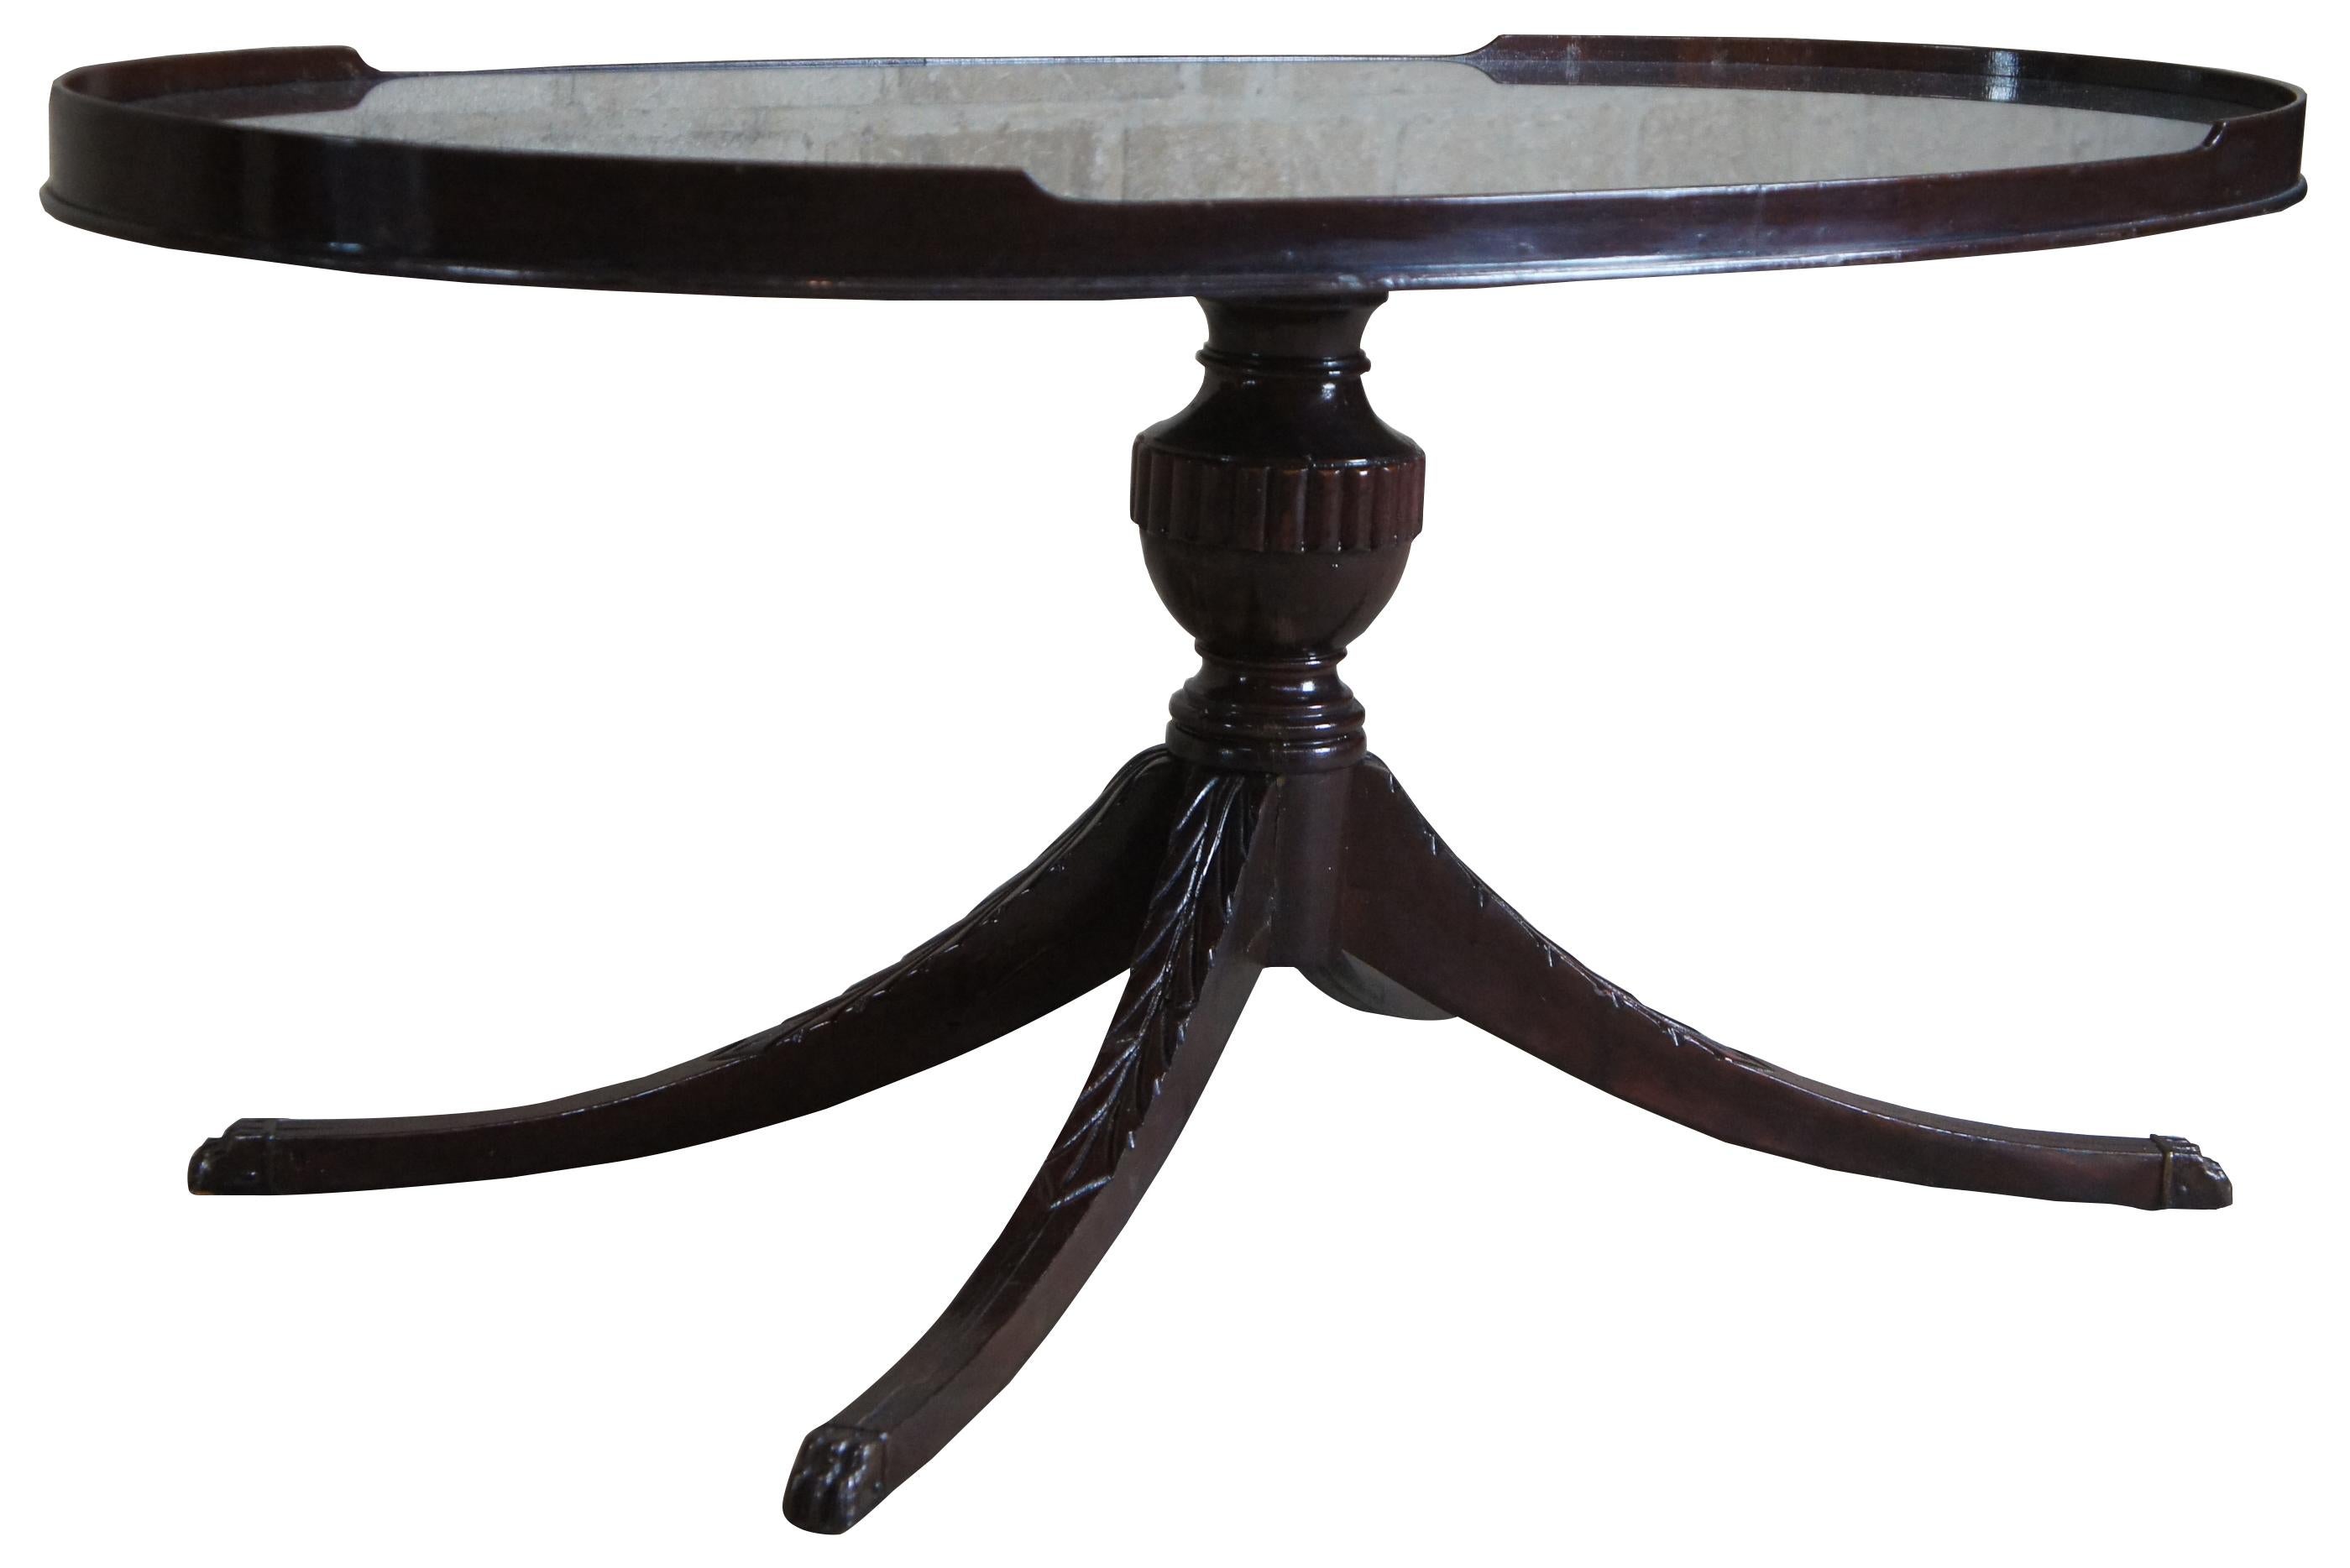 Circa 1940s Duncan Phyfe coffee or tea table. Made from mahogany with an oval form. Features a glass inset top supported by a turned baluster leading to four legs capped with brass paw feet. Measures: 36